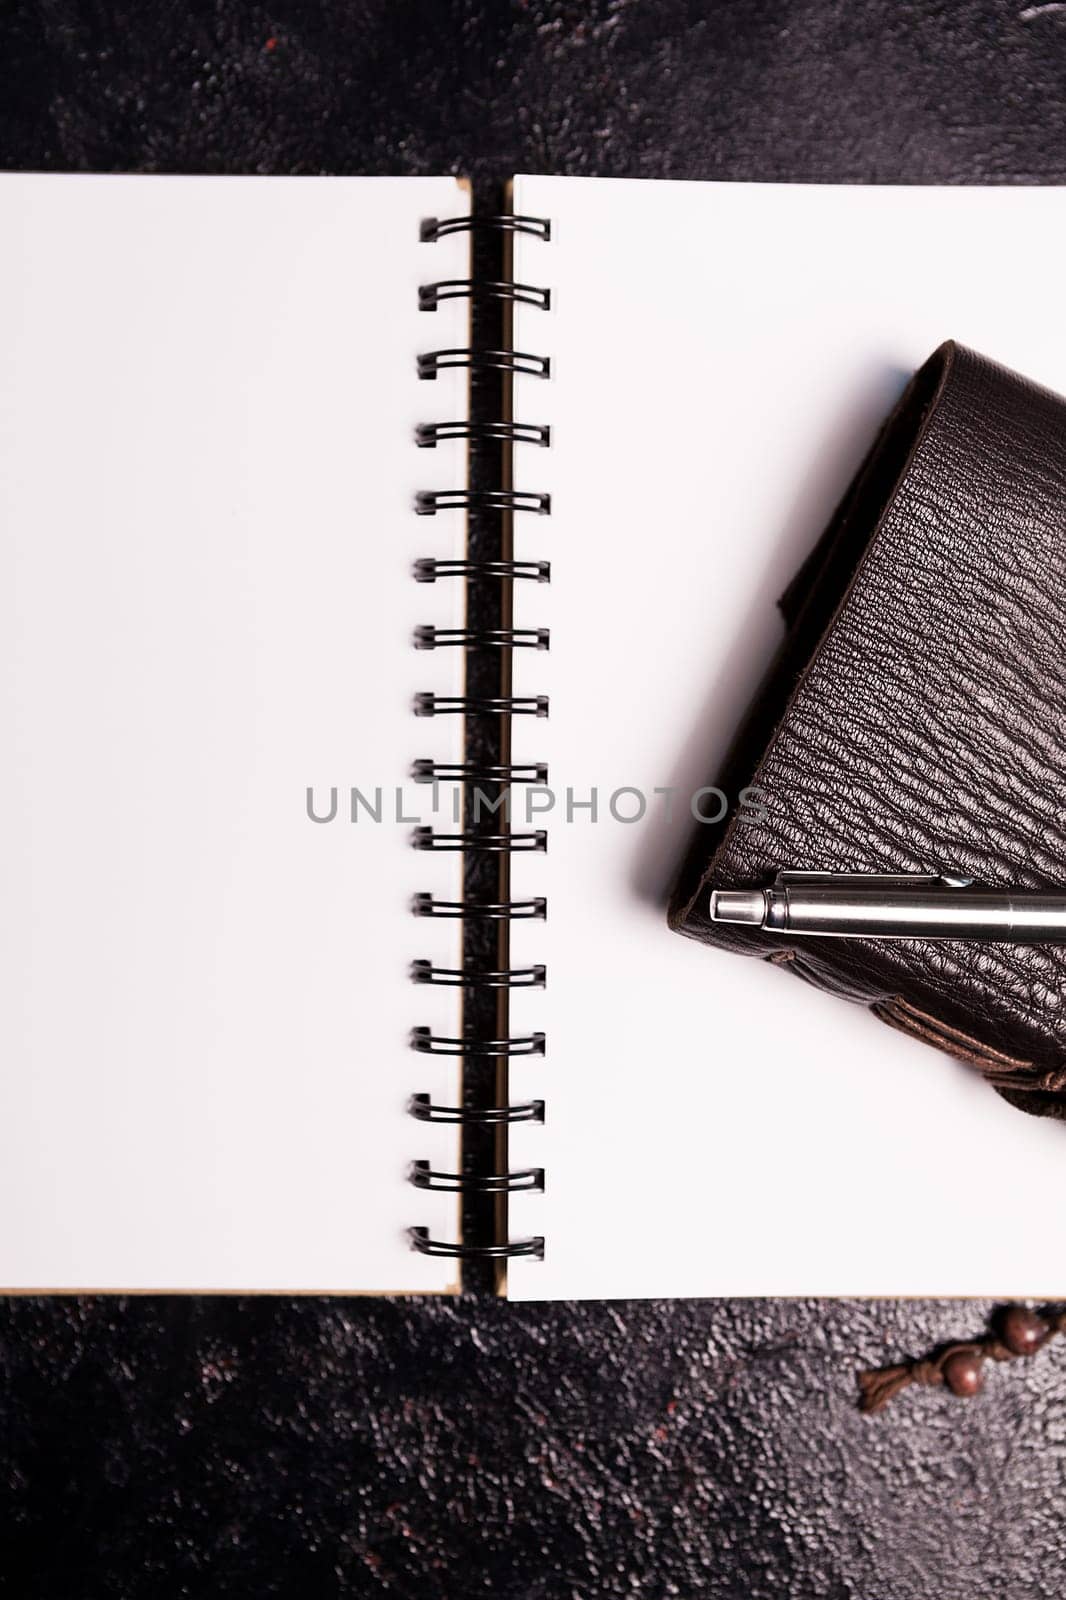 Leather covered vintage ntoebook on an open diary on a dark wooden board